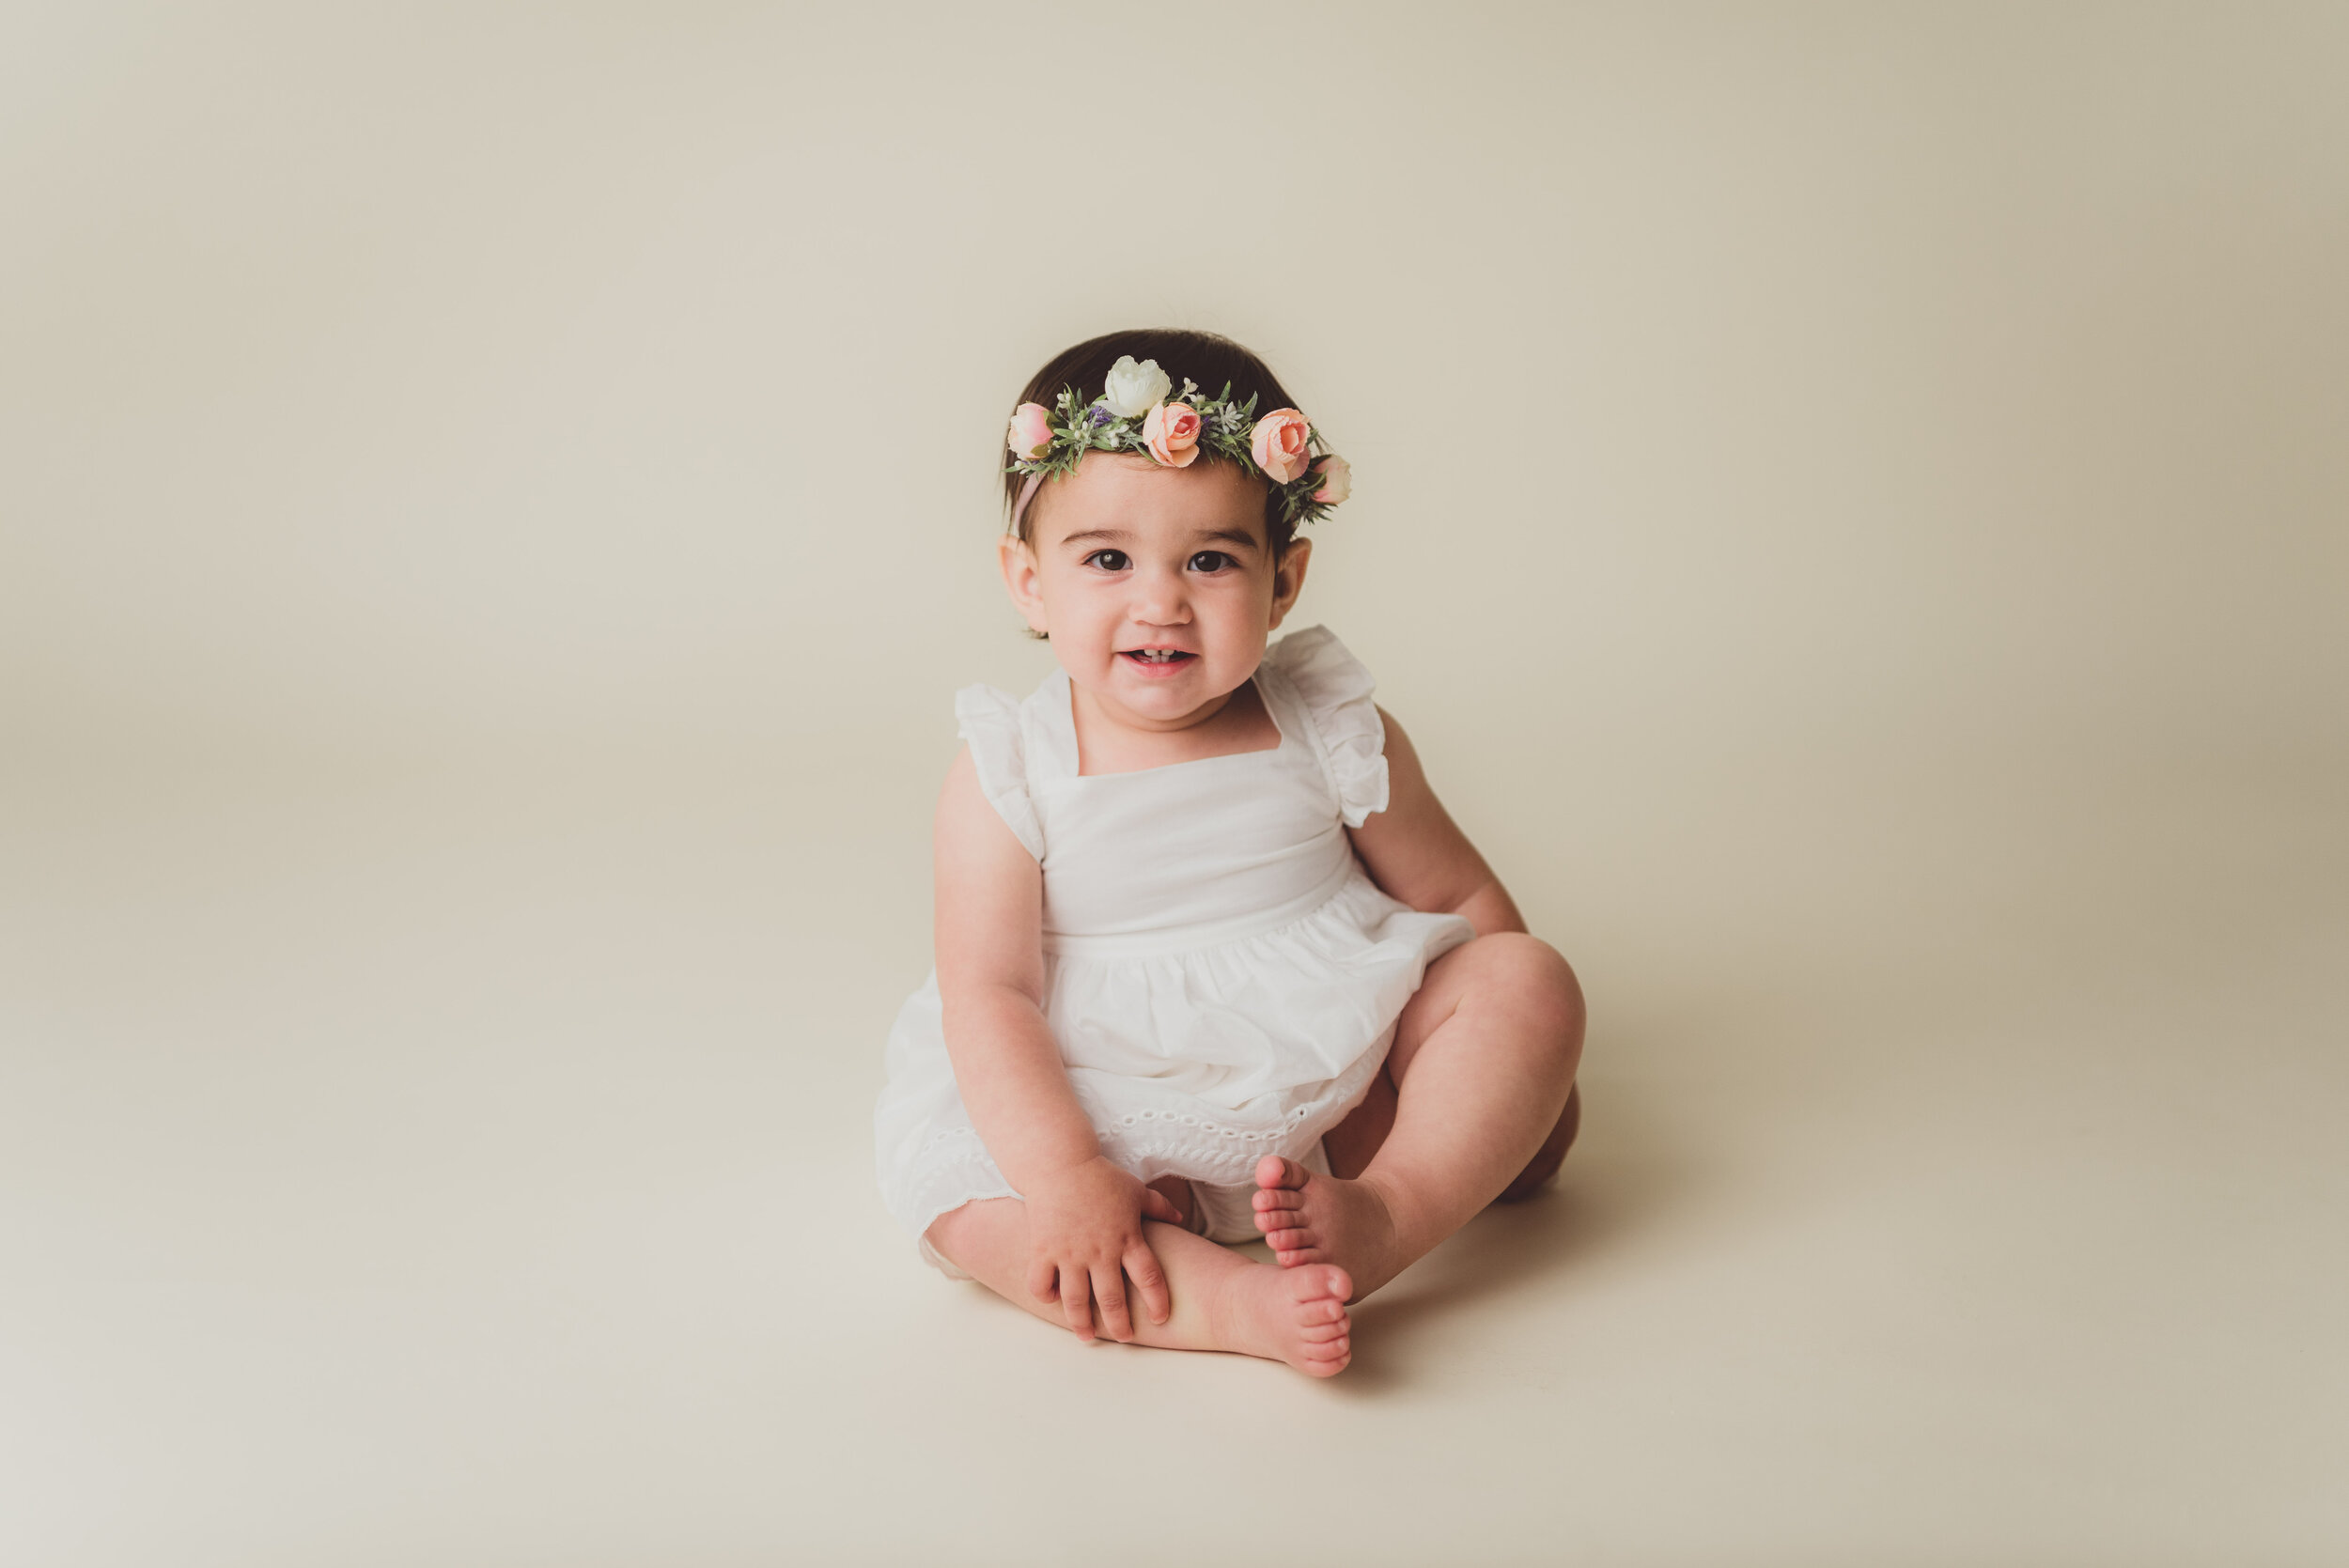 Photography studio in Lafayette Indiana serving West Lafayette and Indianapolis areas for boutique baby and newborn photography milestone photos.